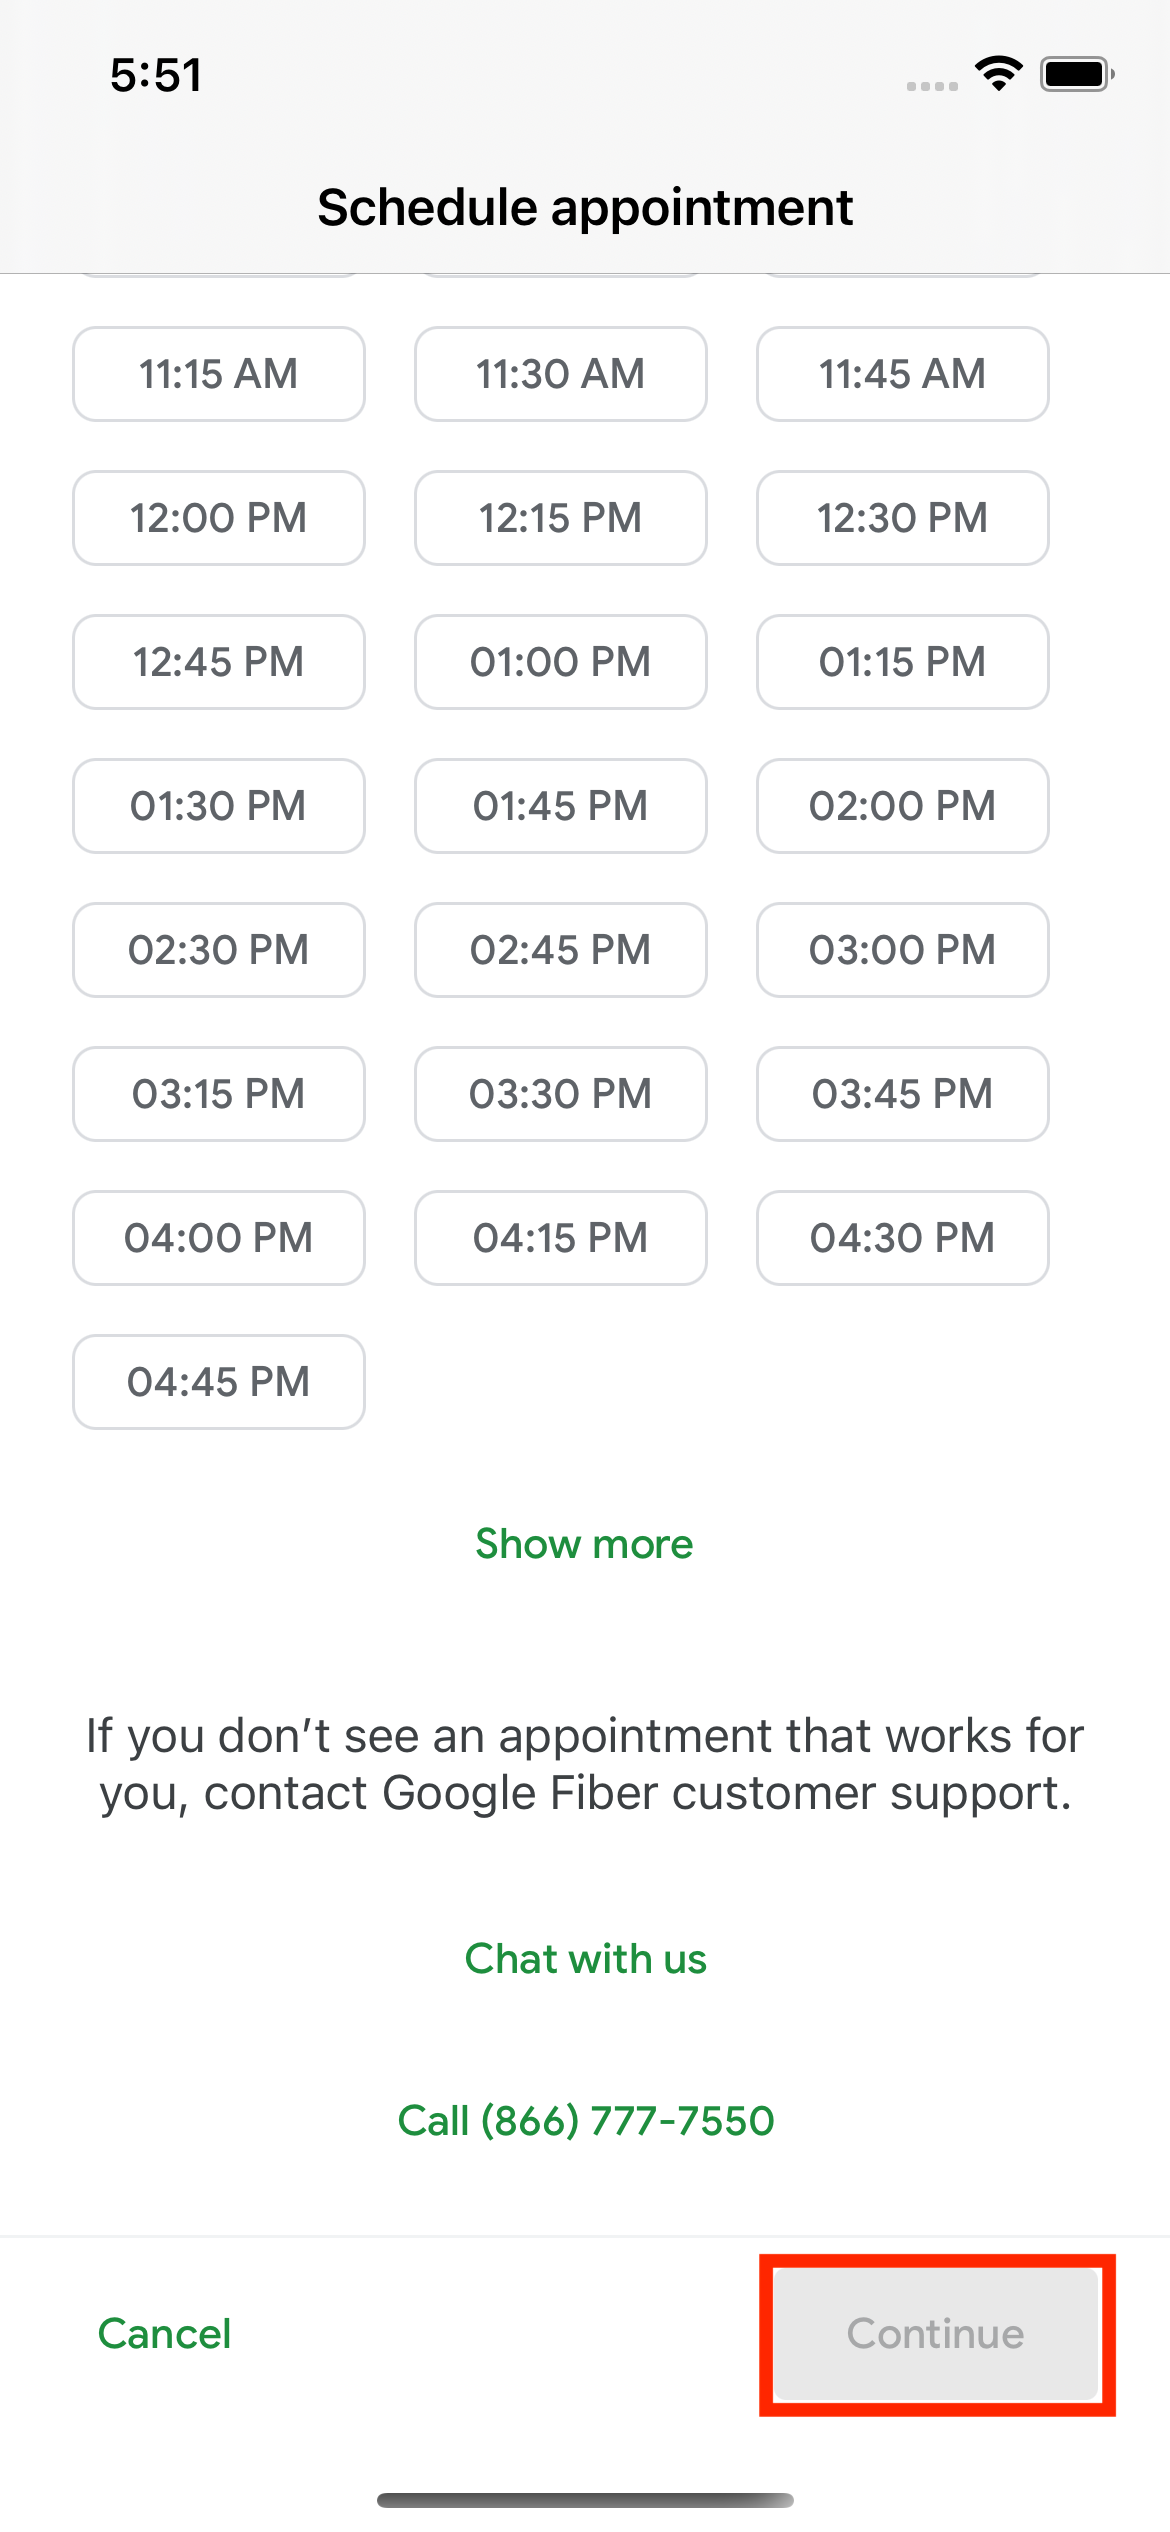 Additional times to select for appointments